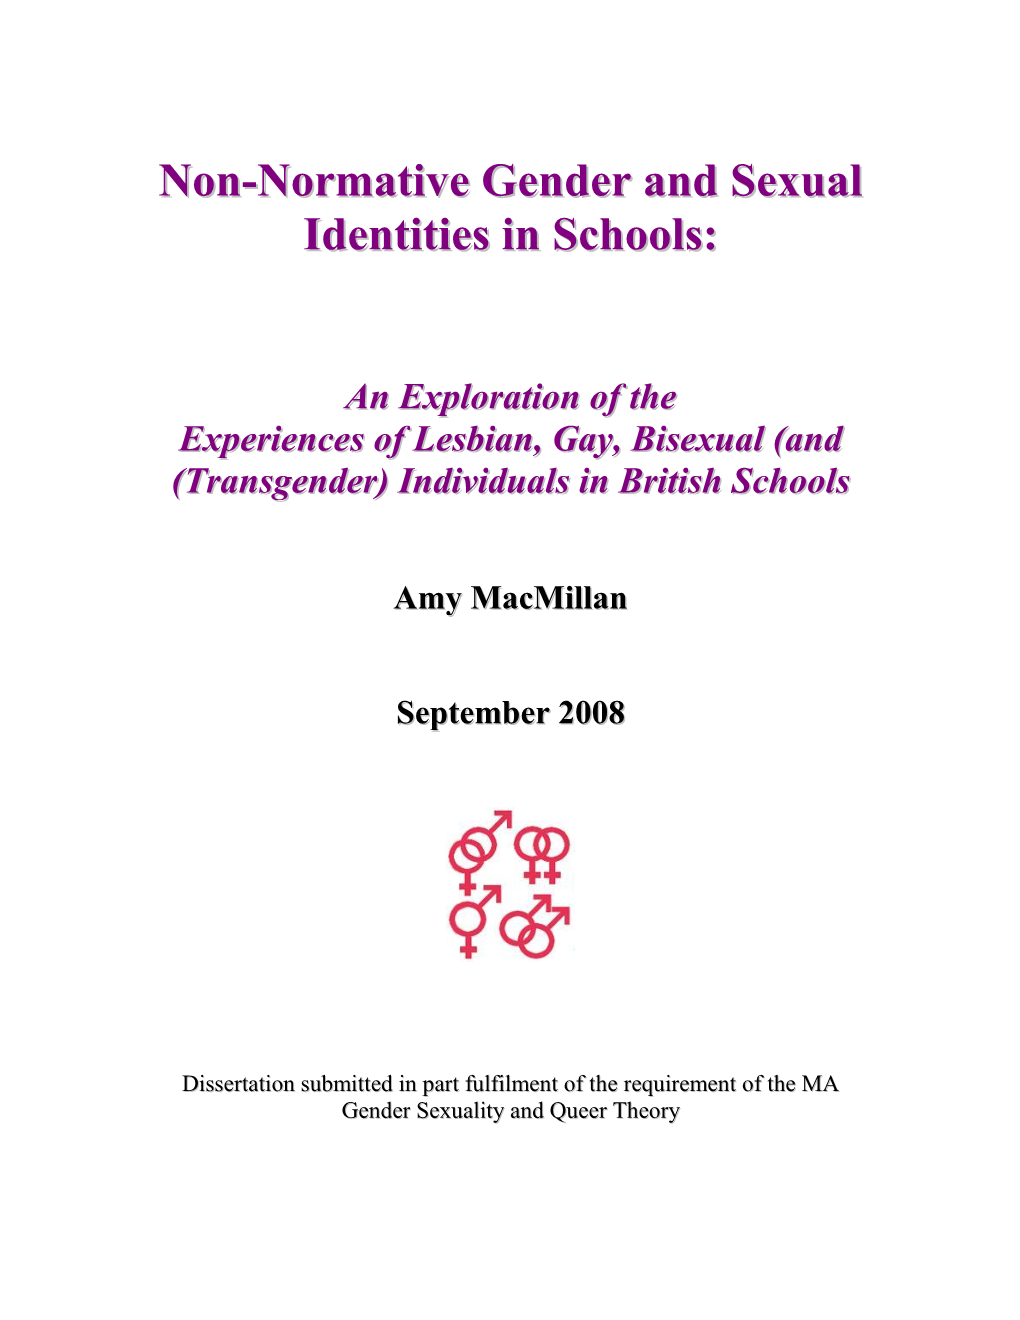 Non-Normative Gender and Sexual Identities in Schools